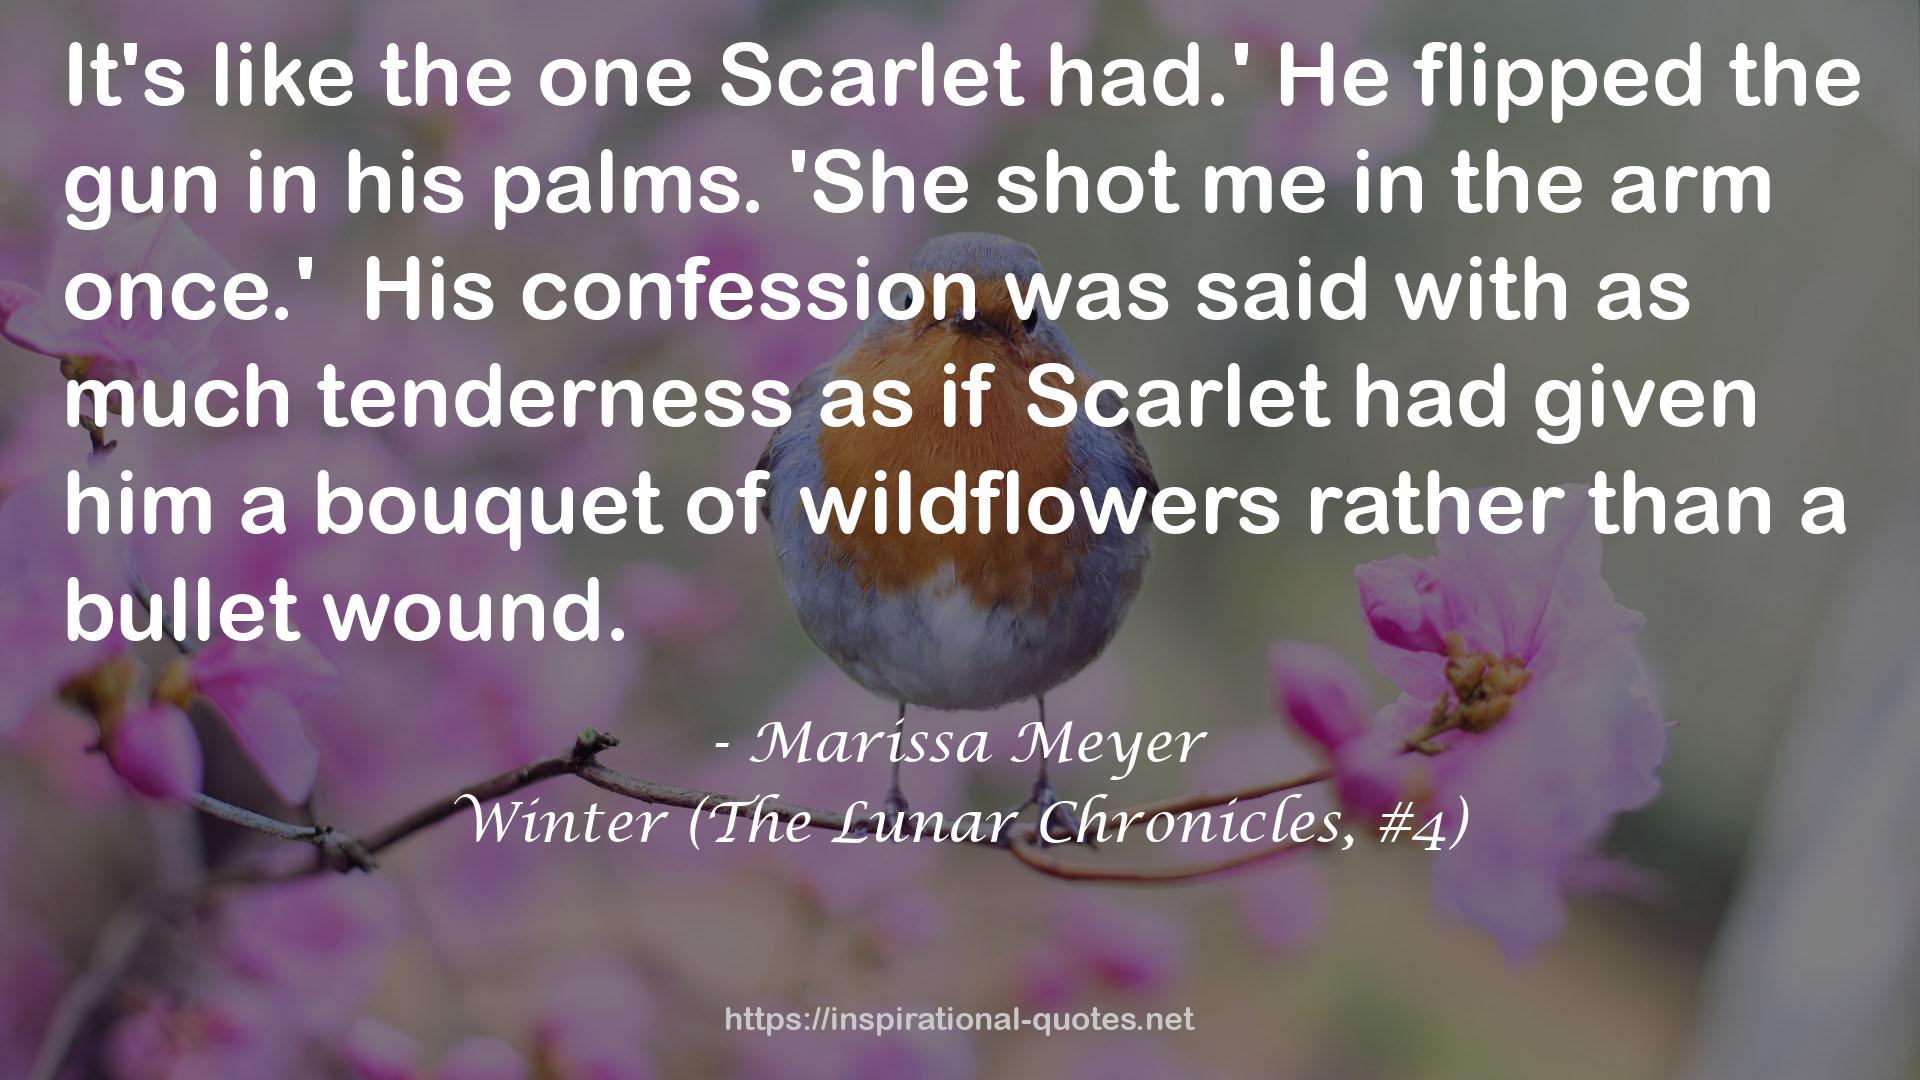 Winter (The Lunar Chronicles, #4) QUOTES